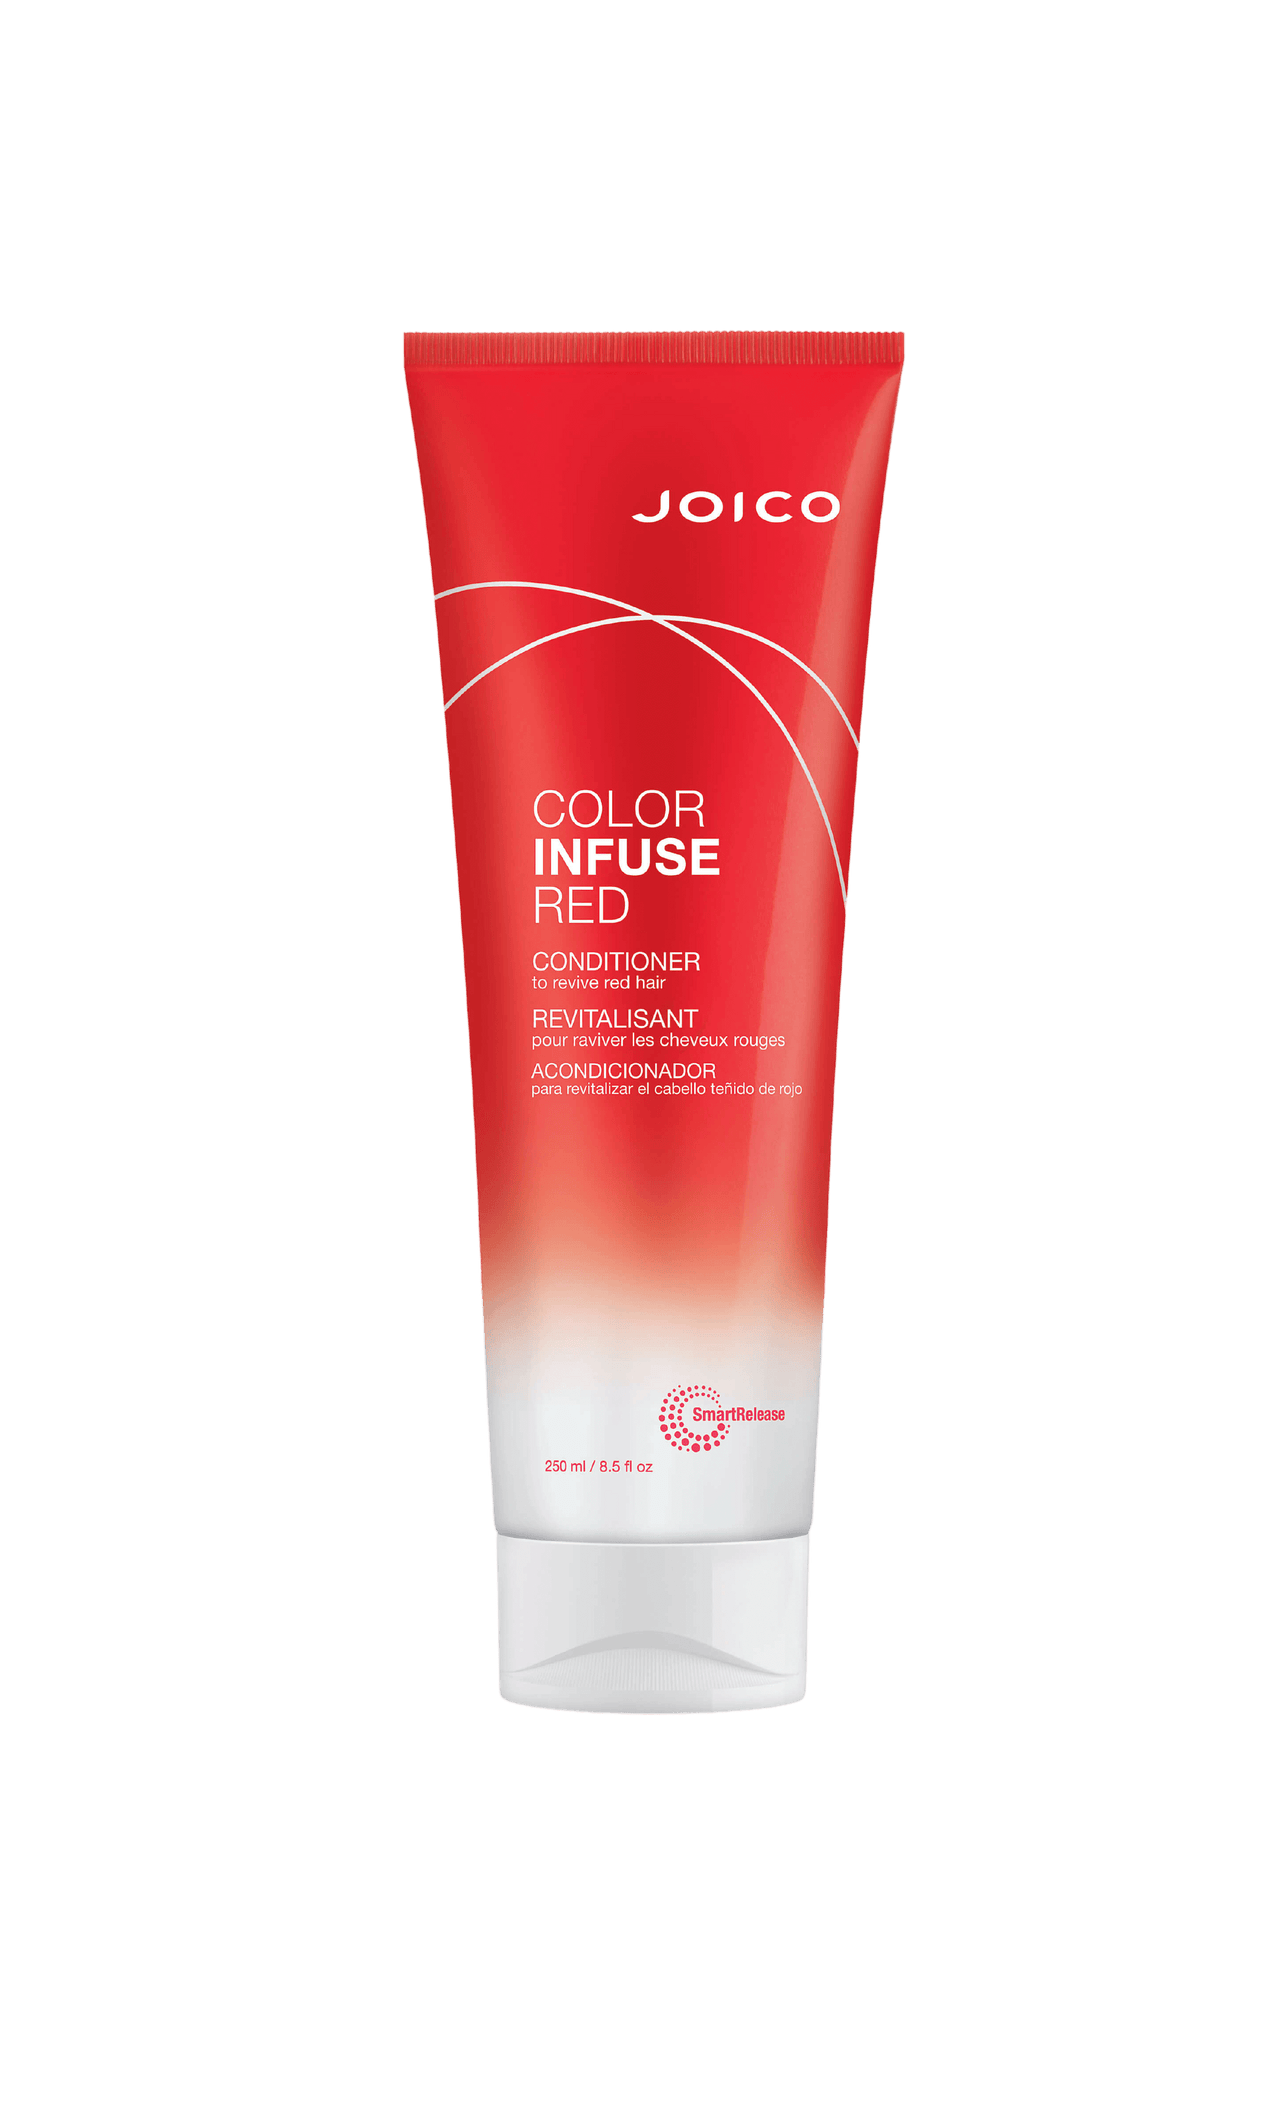 Joico Color Infuse Red Conditioner 250mL Tube